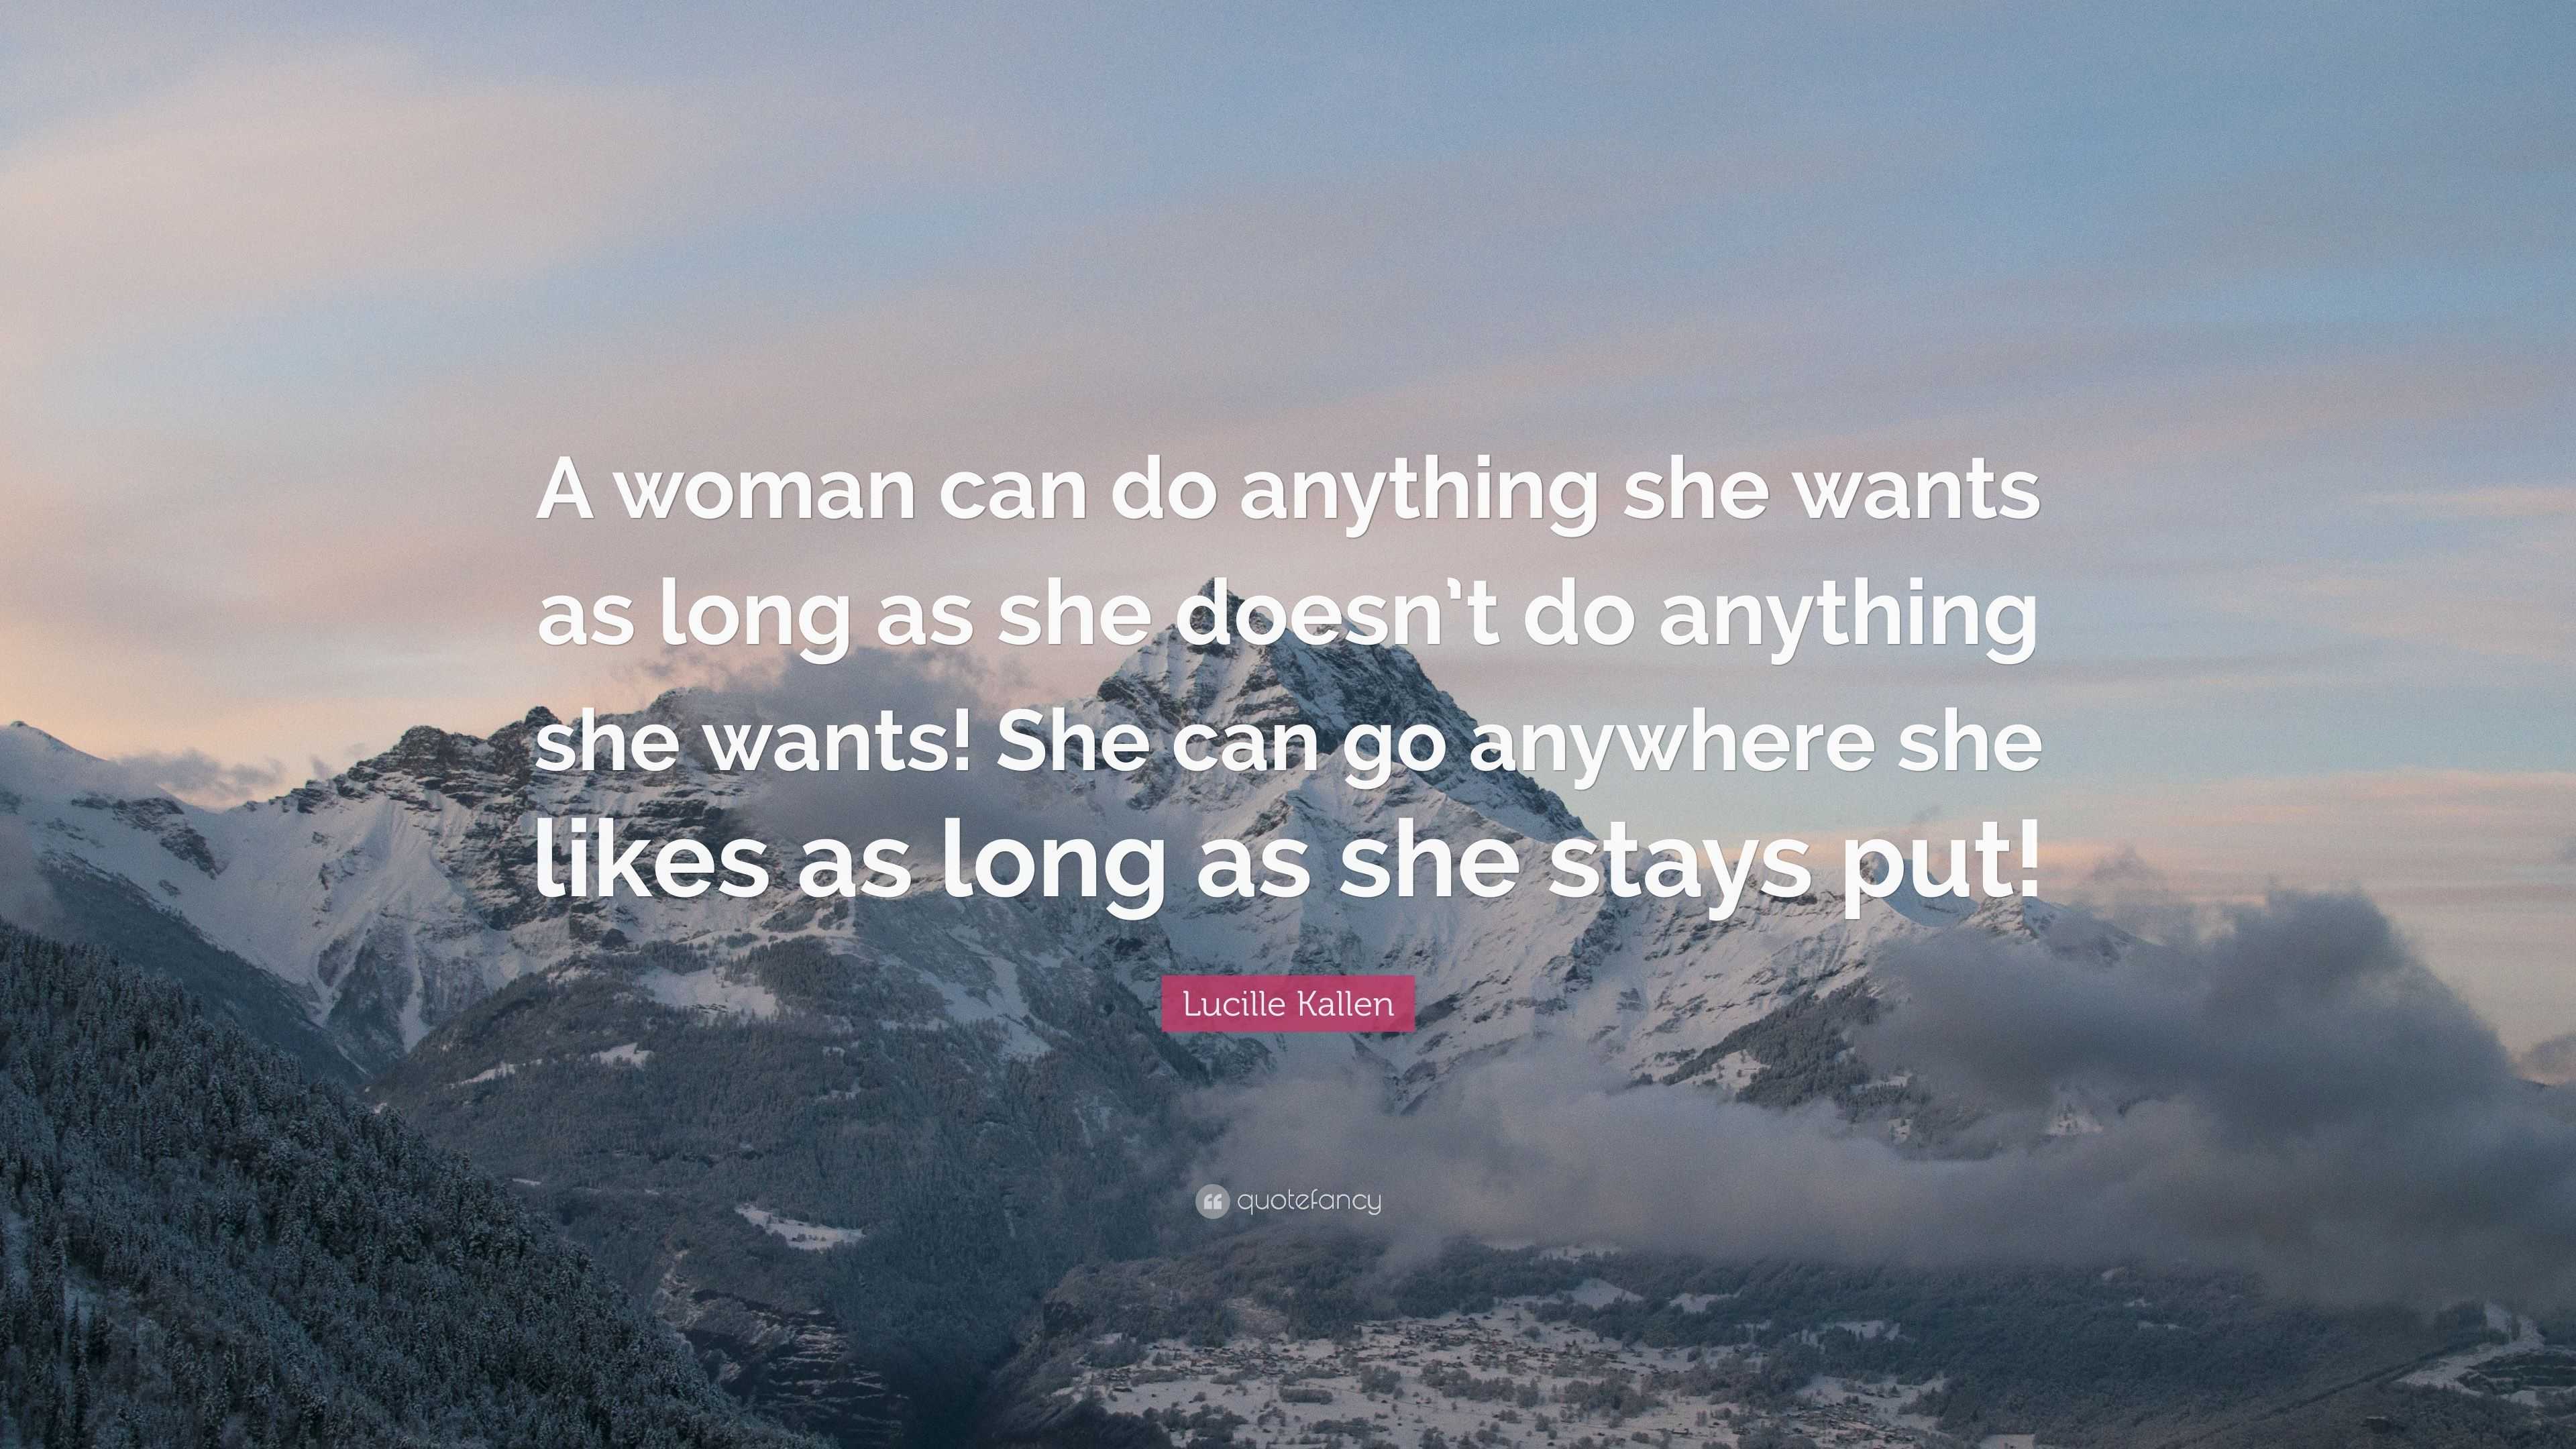 Lucille Kallen Quote: “A woman can do anything she wants as long as she ...